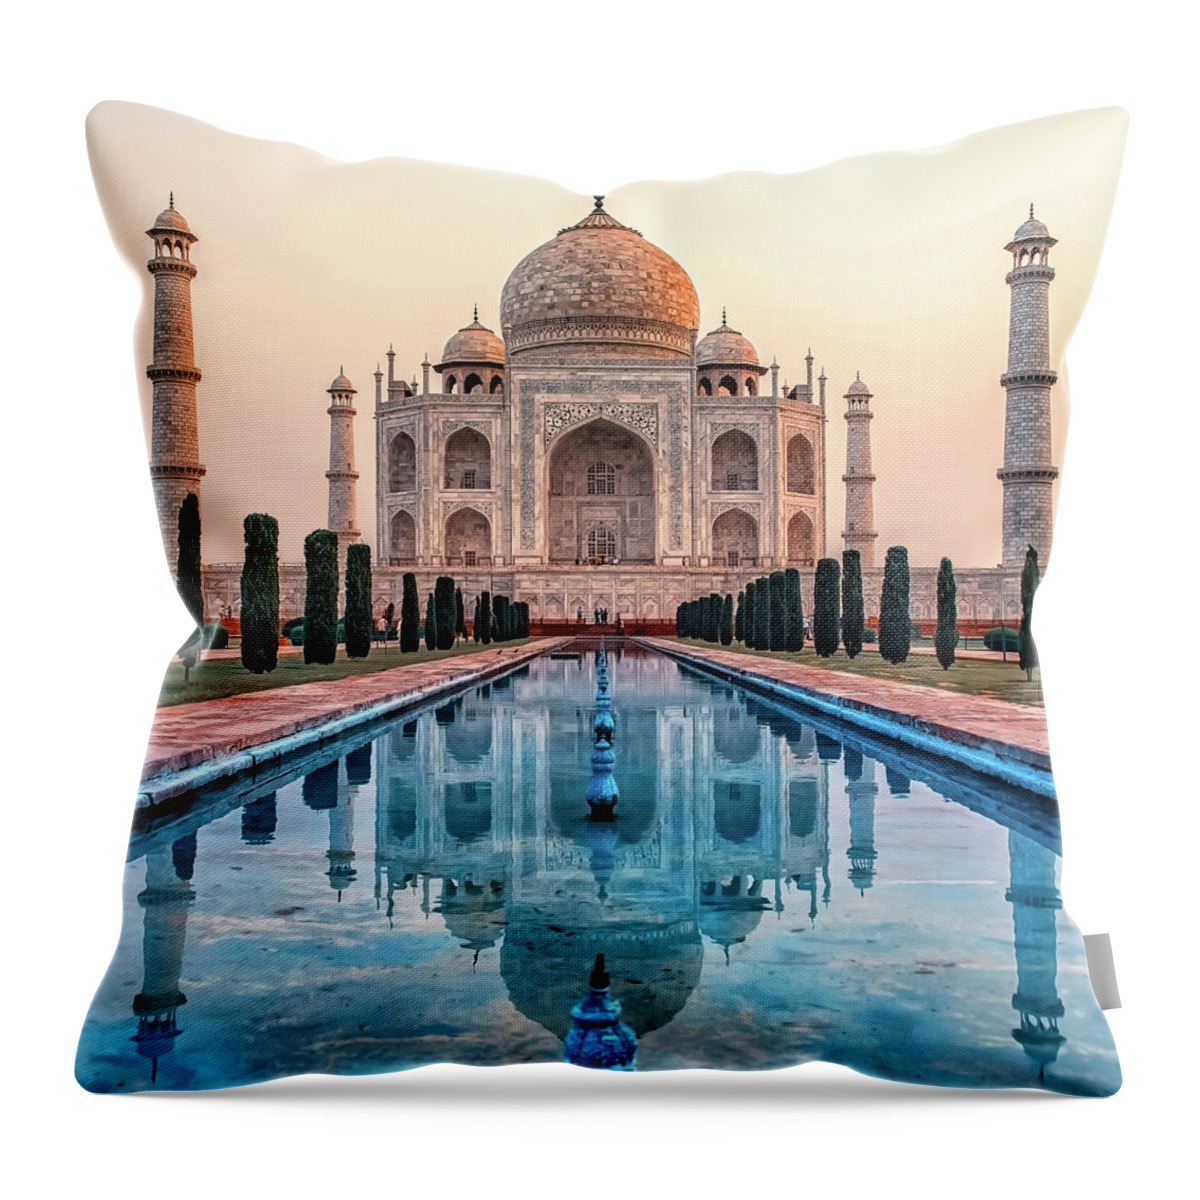 Architecture Throw Pillow featuring the photograph Taj Mahal Mausoleum by Manjik Pictures